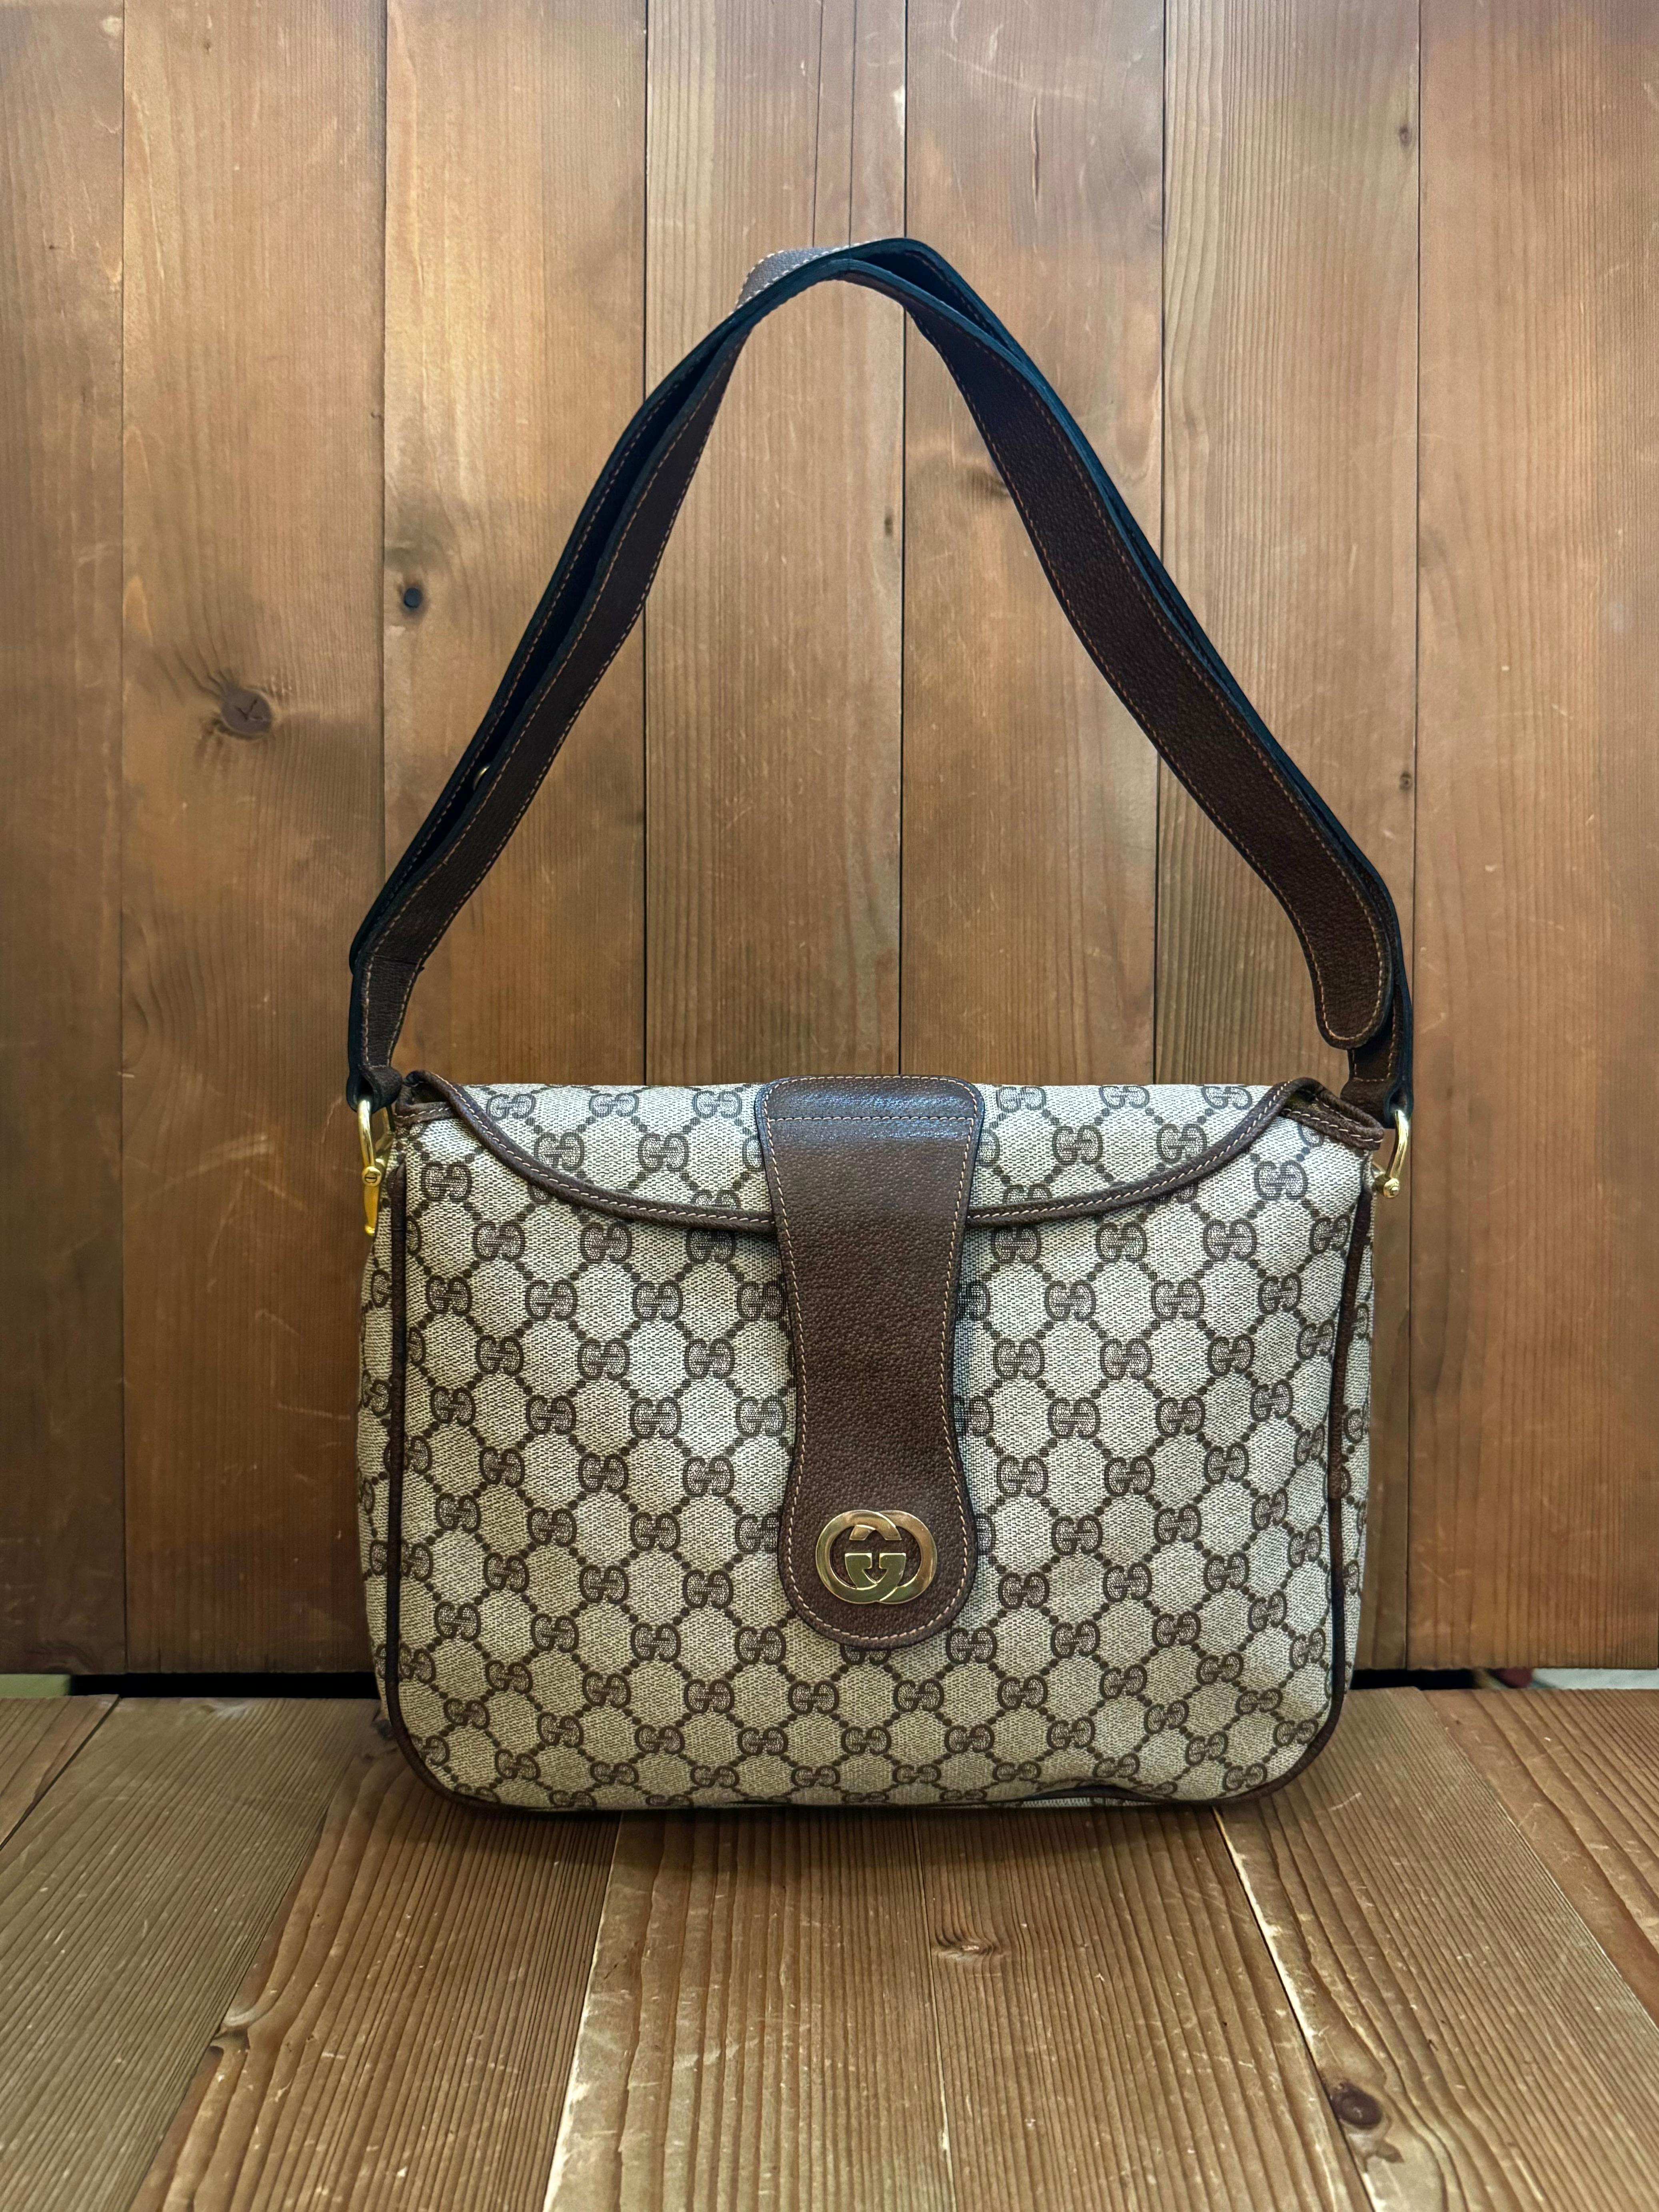 This vintage GUCCI shoulder bag is crafted of GG monogram coated canvas and pigskin leather in brown featuring gold toned hardware. Front snap closure opens to a diamante jacquard interior with a zippered pocket. This shoulder bag features an